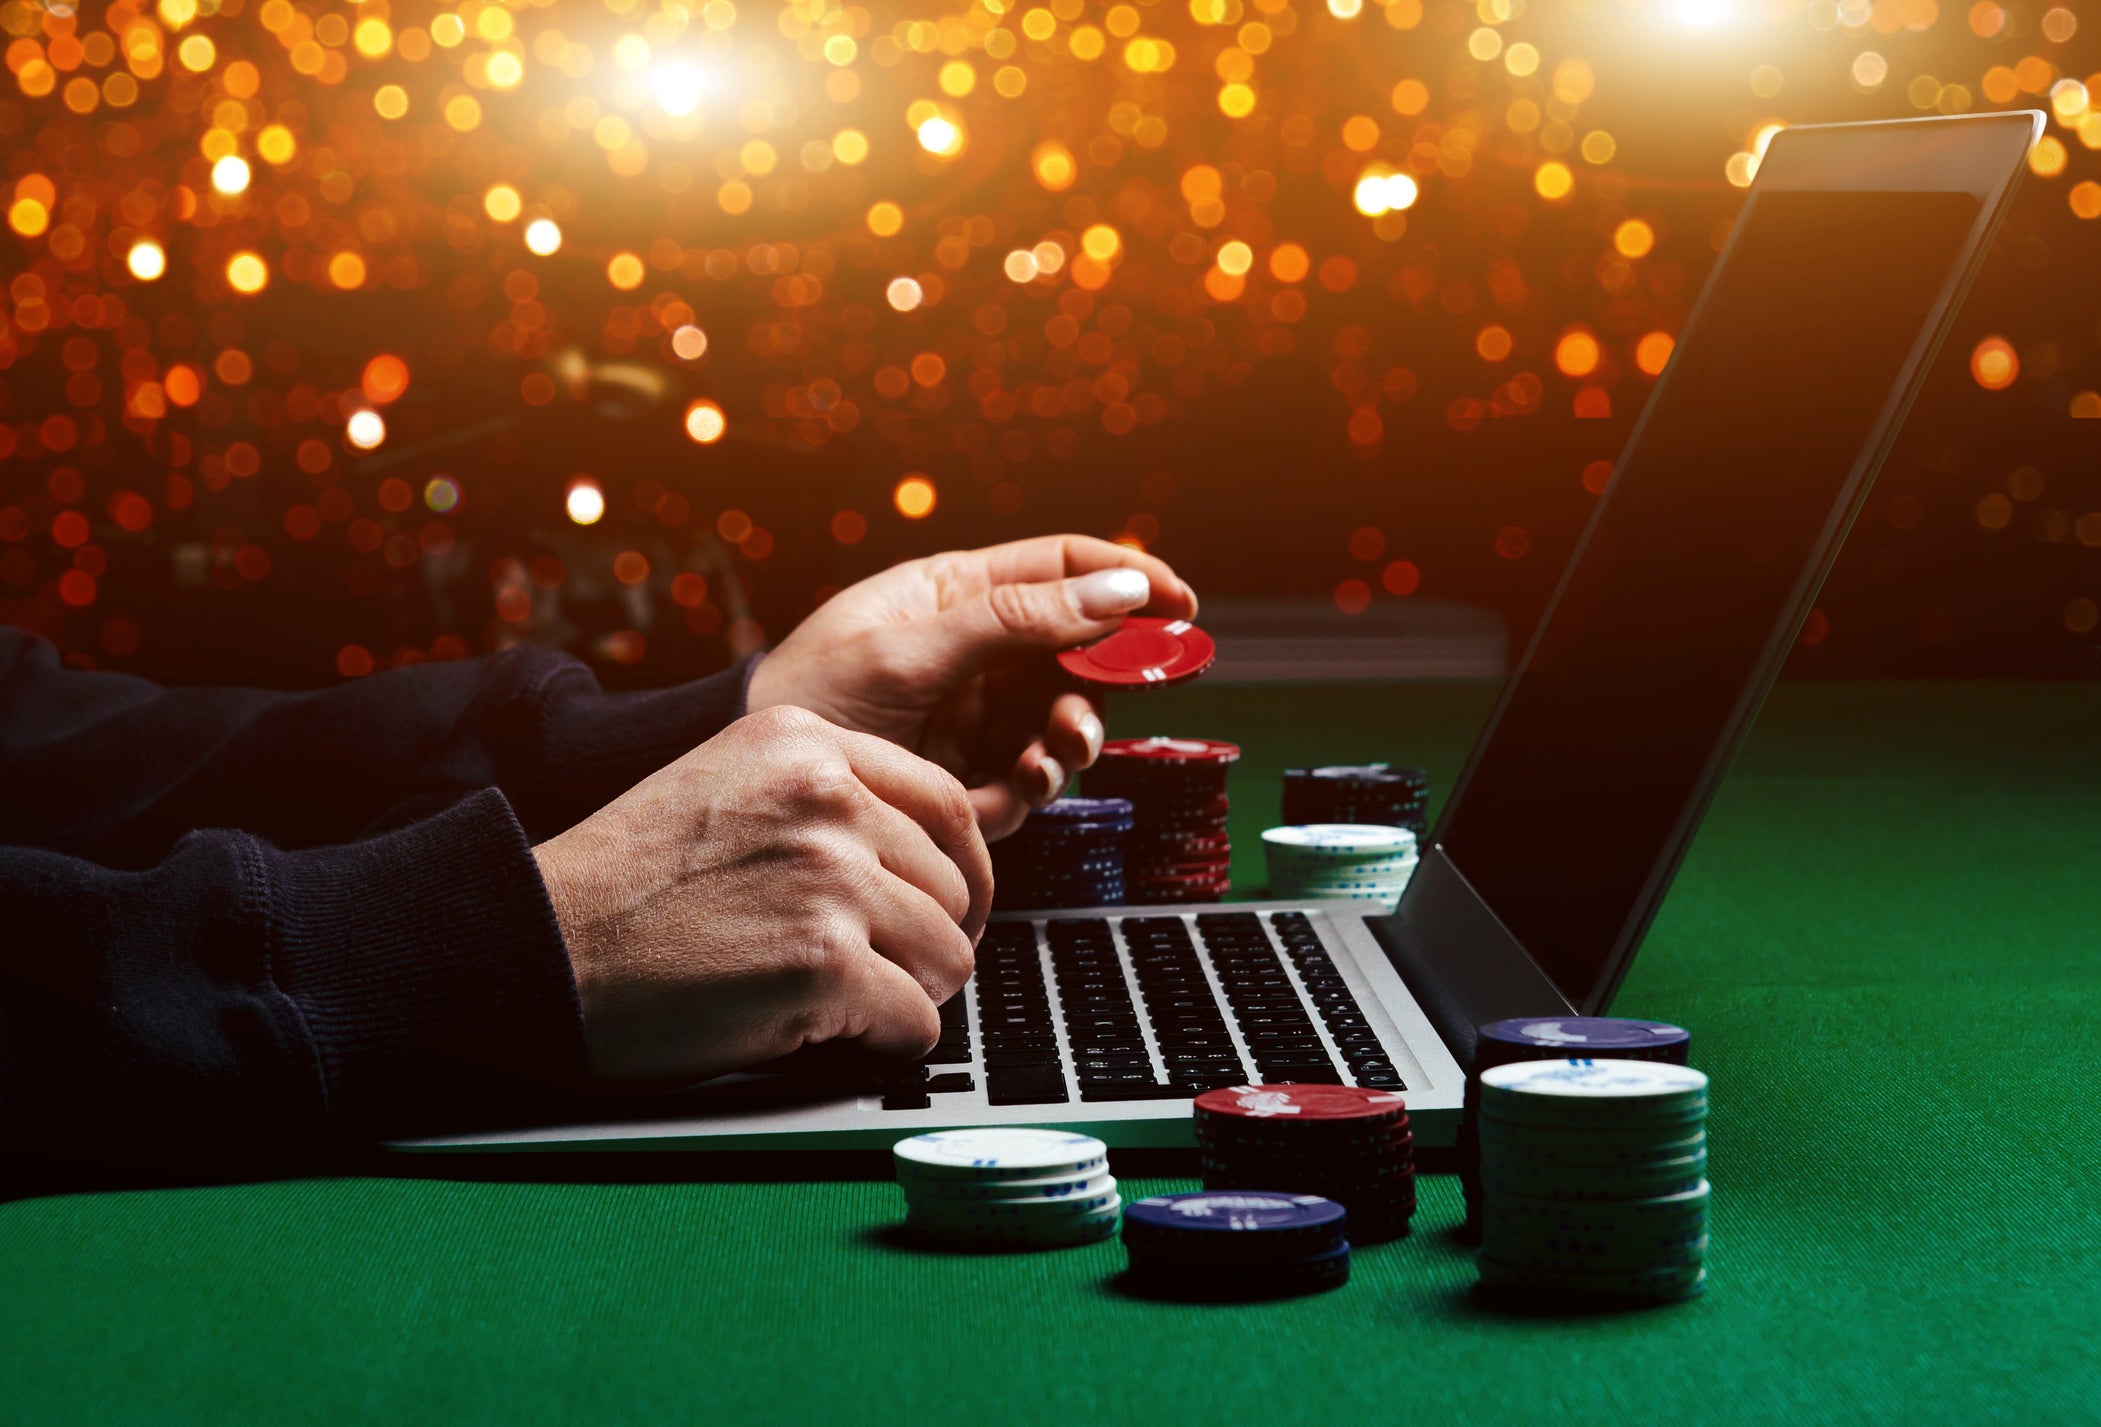 Experience E-Wallet Casino Exhilaration with Free Credit Rating, No Deposit